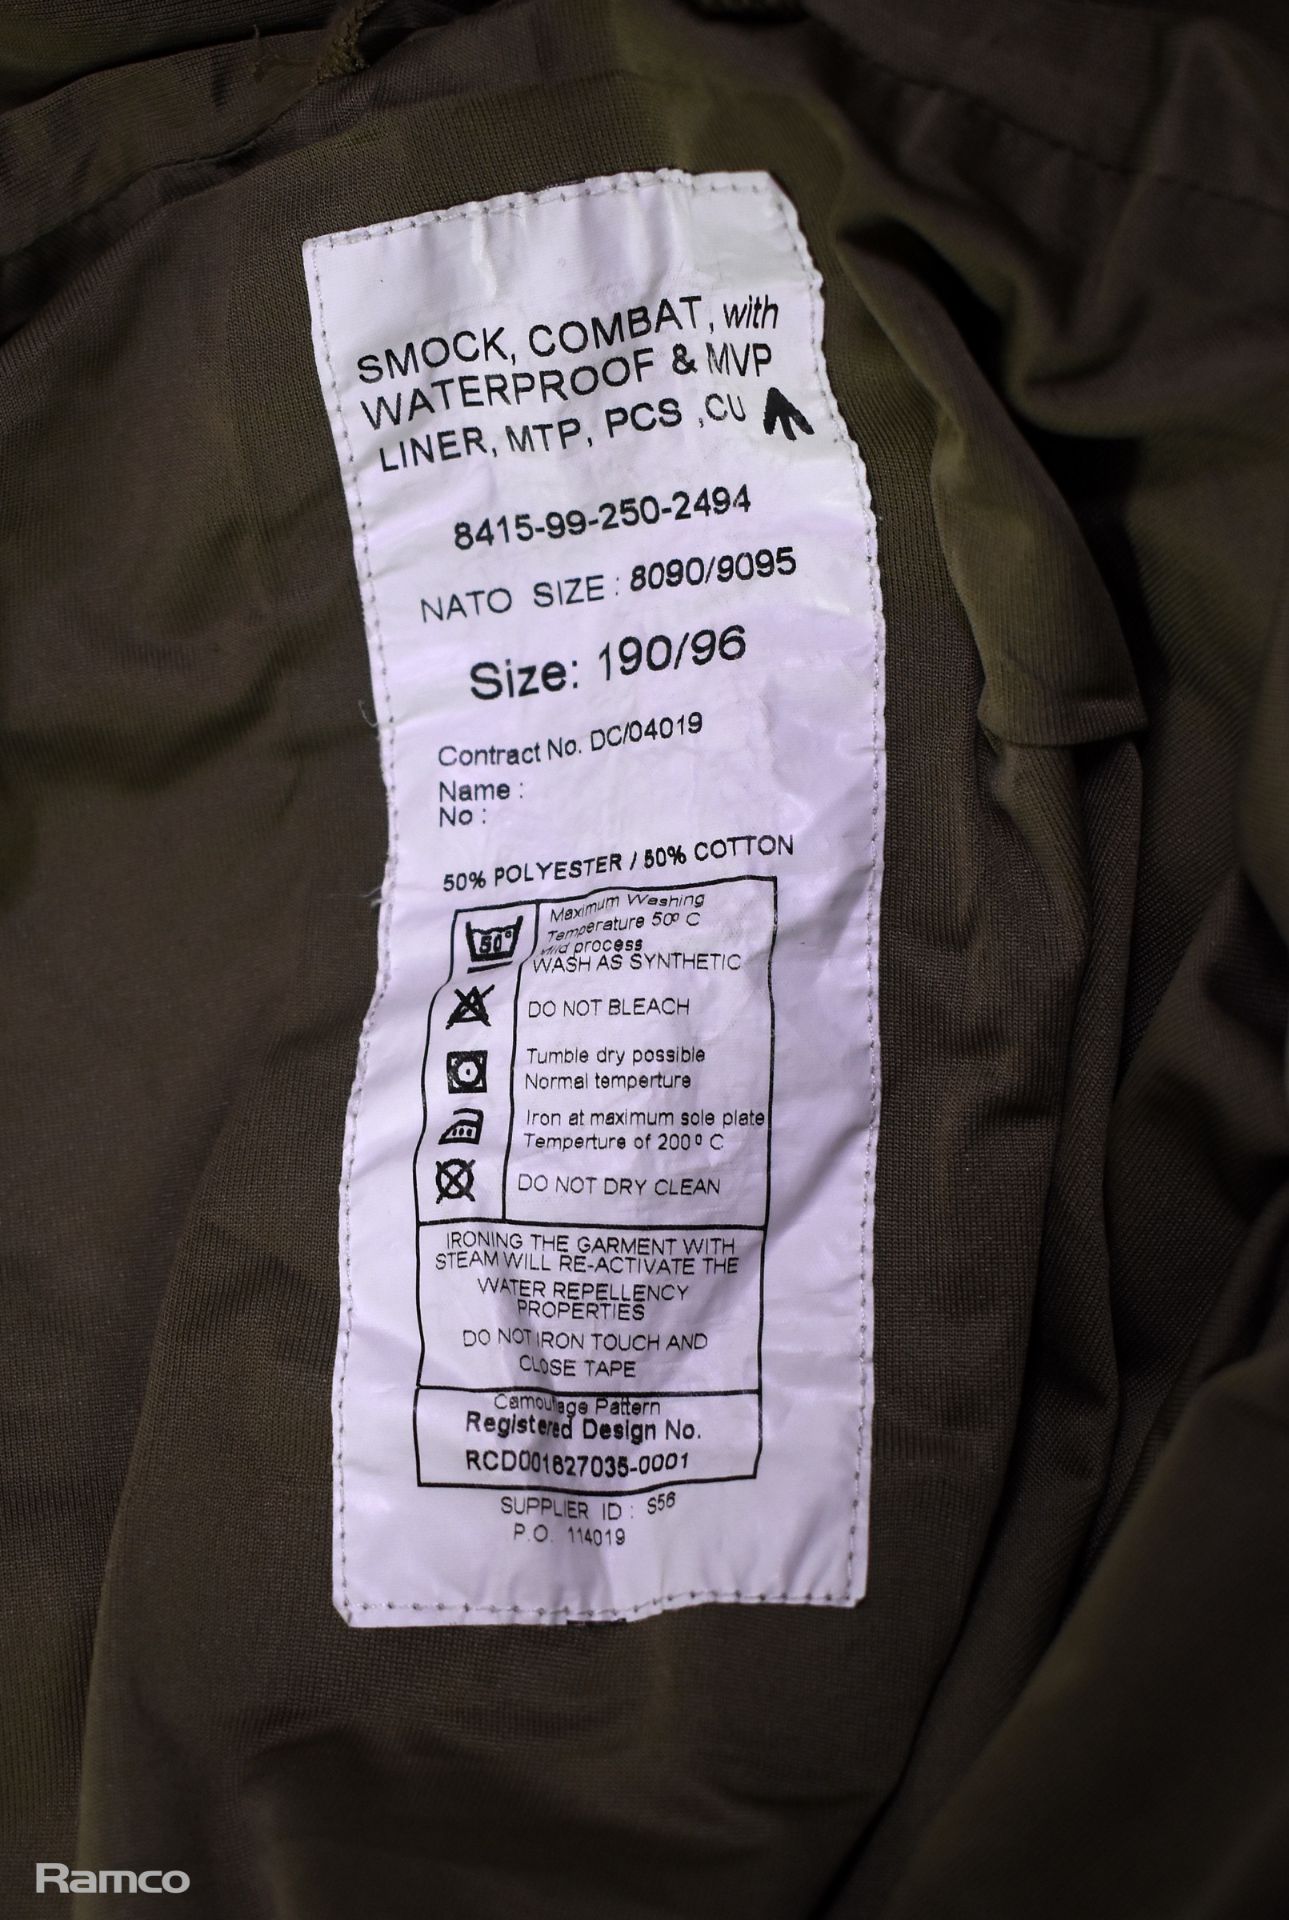 25x British Army MTP windproof smocks - mixed grades and sizes - Image 10 of 10